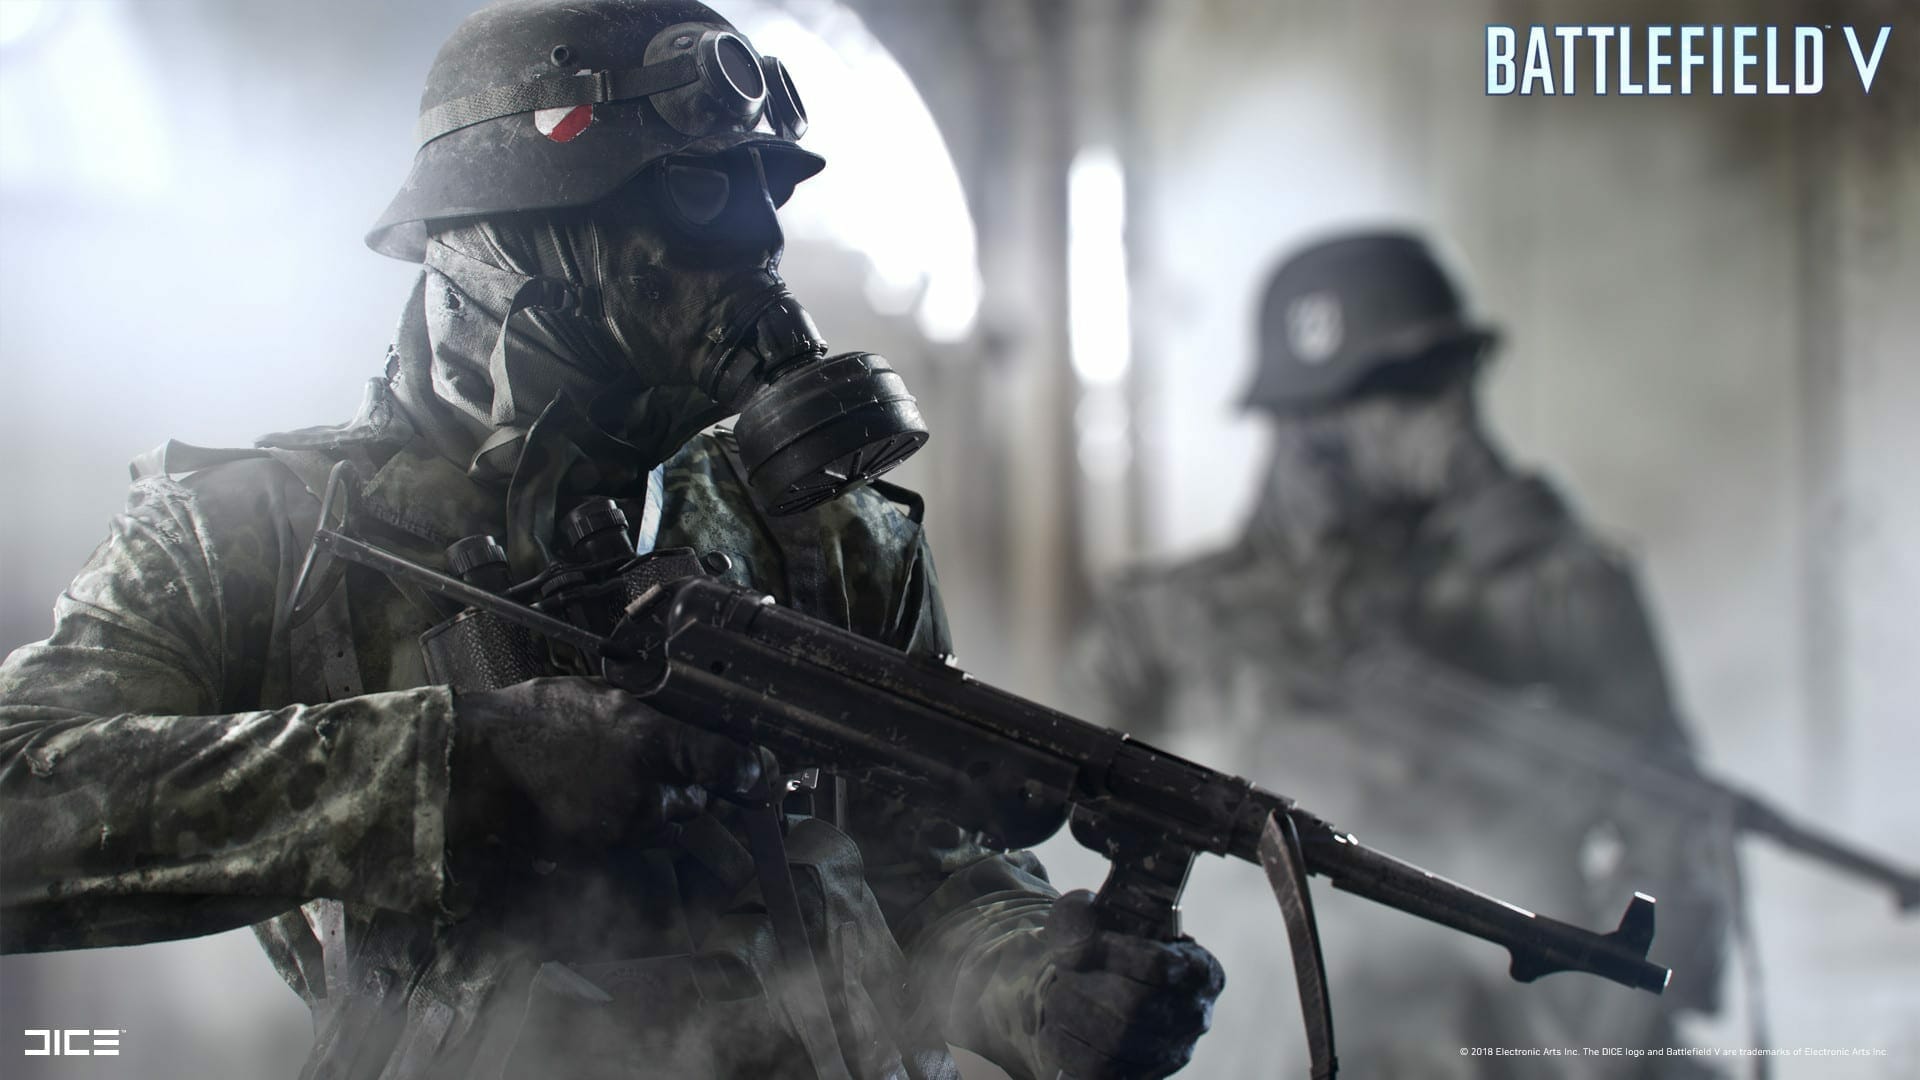 Battlefield 5 Update 1.16 Patch Notes Fixes Bugs, Crashes and Brings